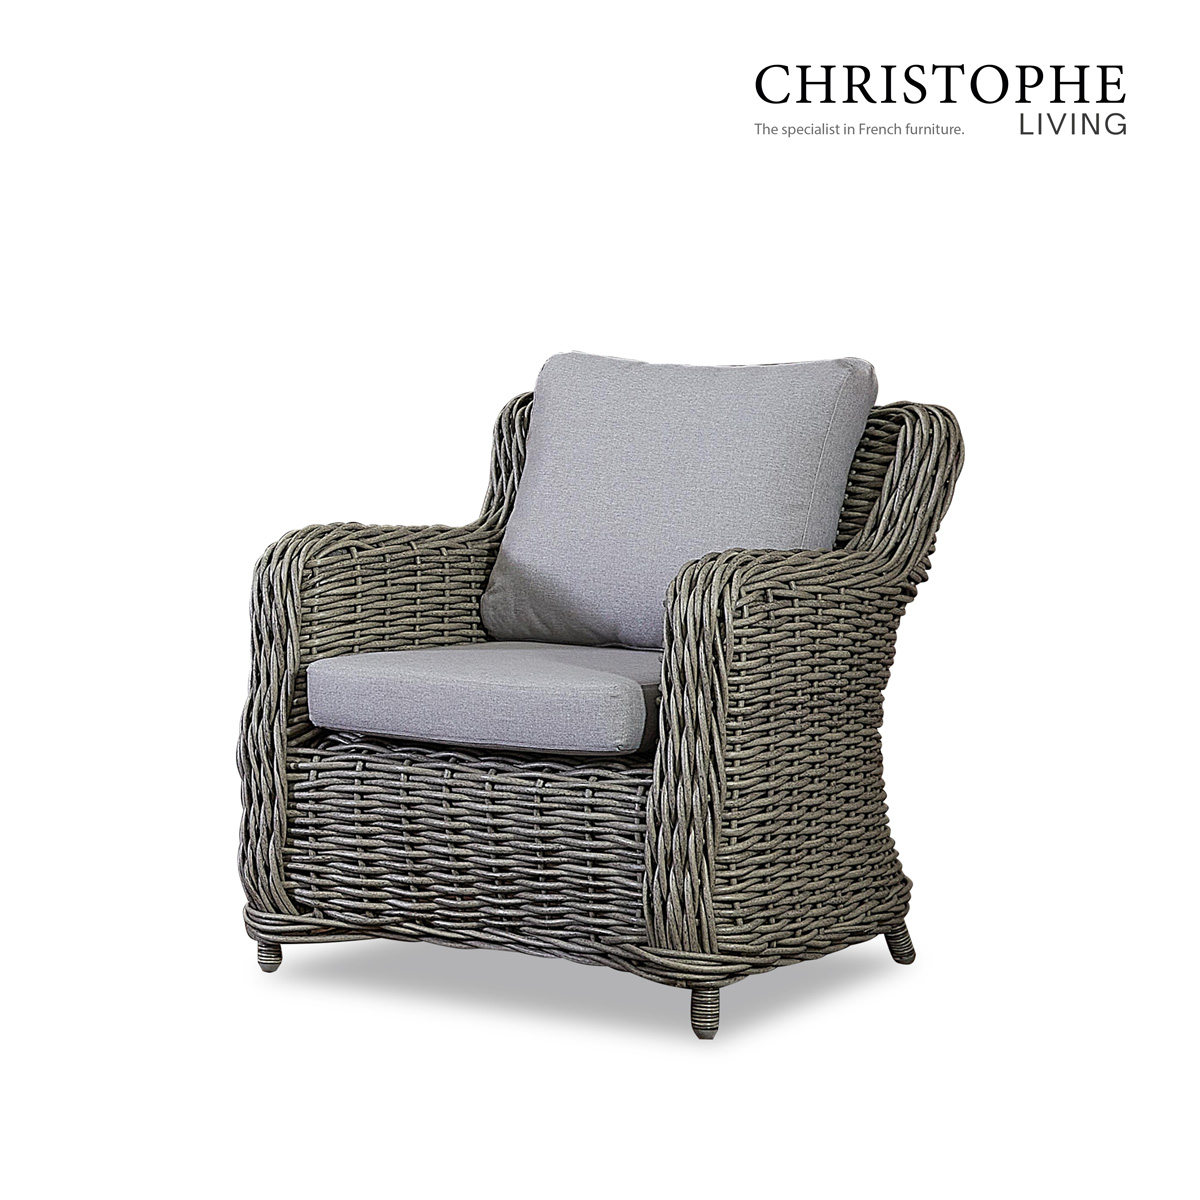 Manly French Provincial Outdoor Lounge Chair in French Grey Synthetic Rattan and Wicker